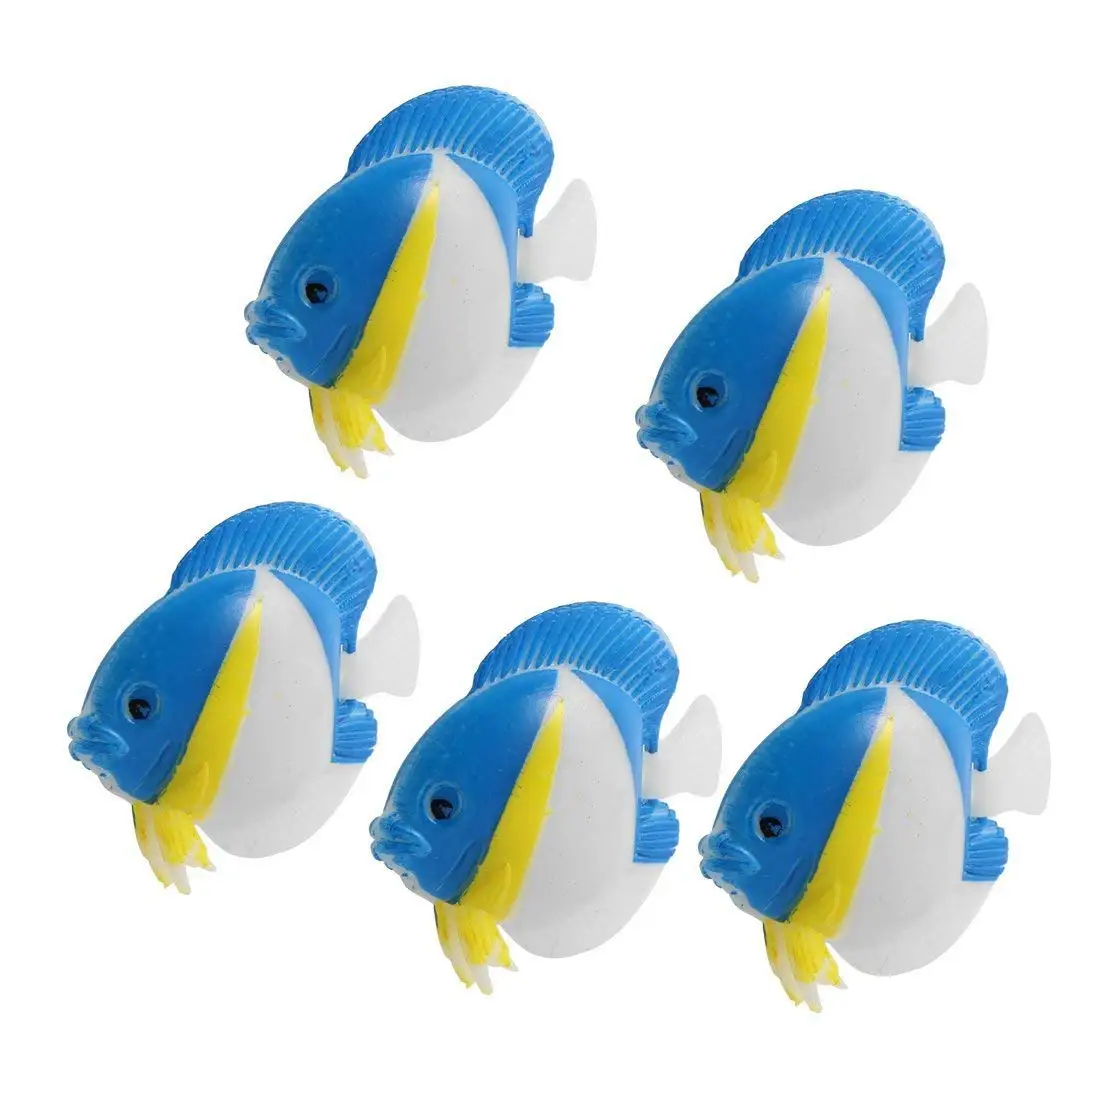 Cheap Plastic Floating Fish Toy, find Plastic Floating